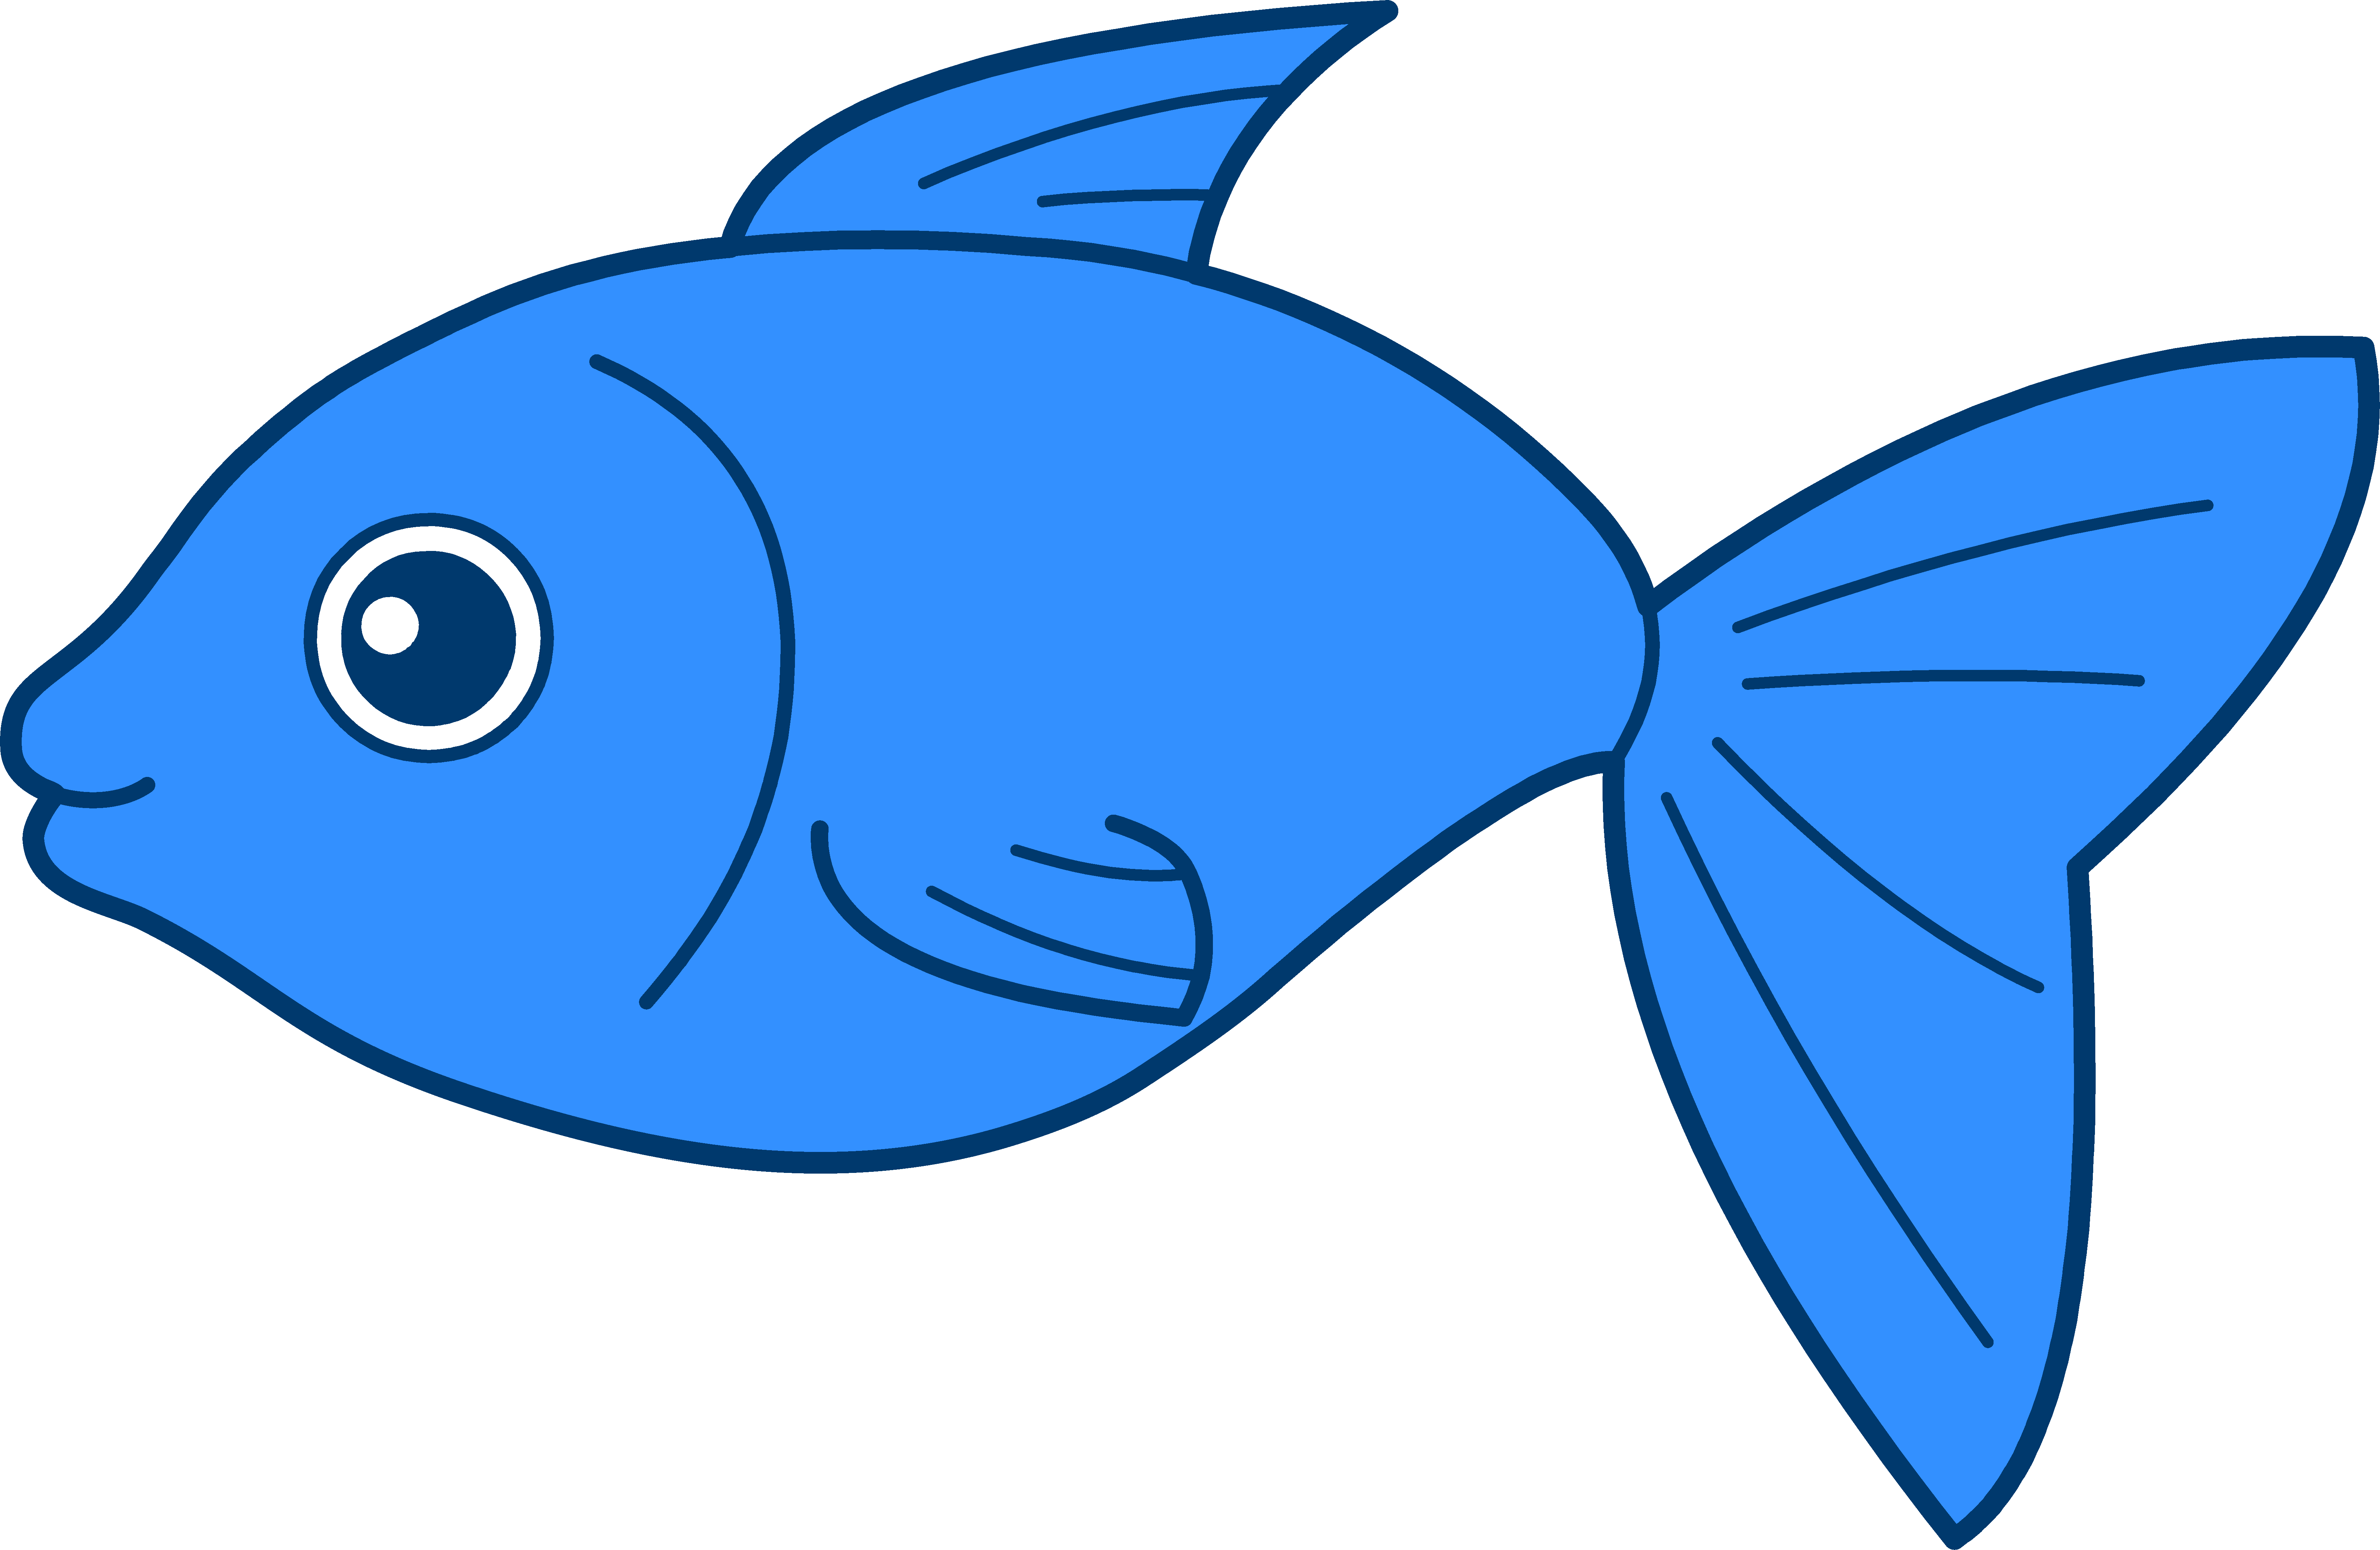 Kitty Fisheries Marlin Figurative Awesome PNG